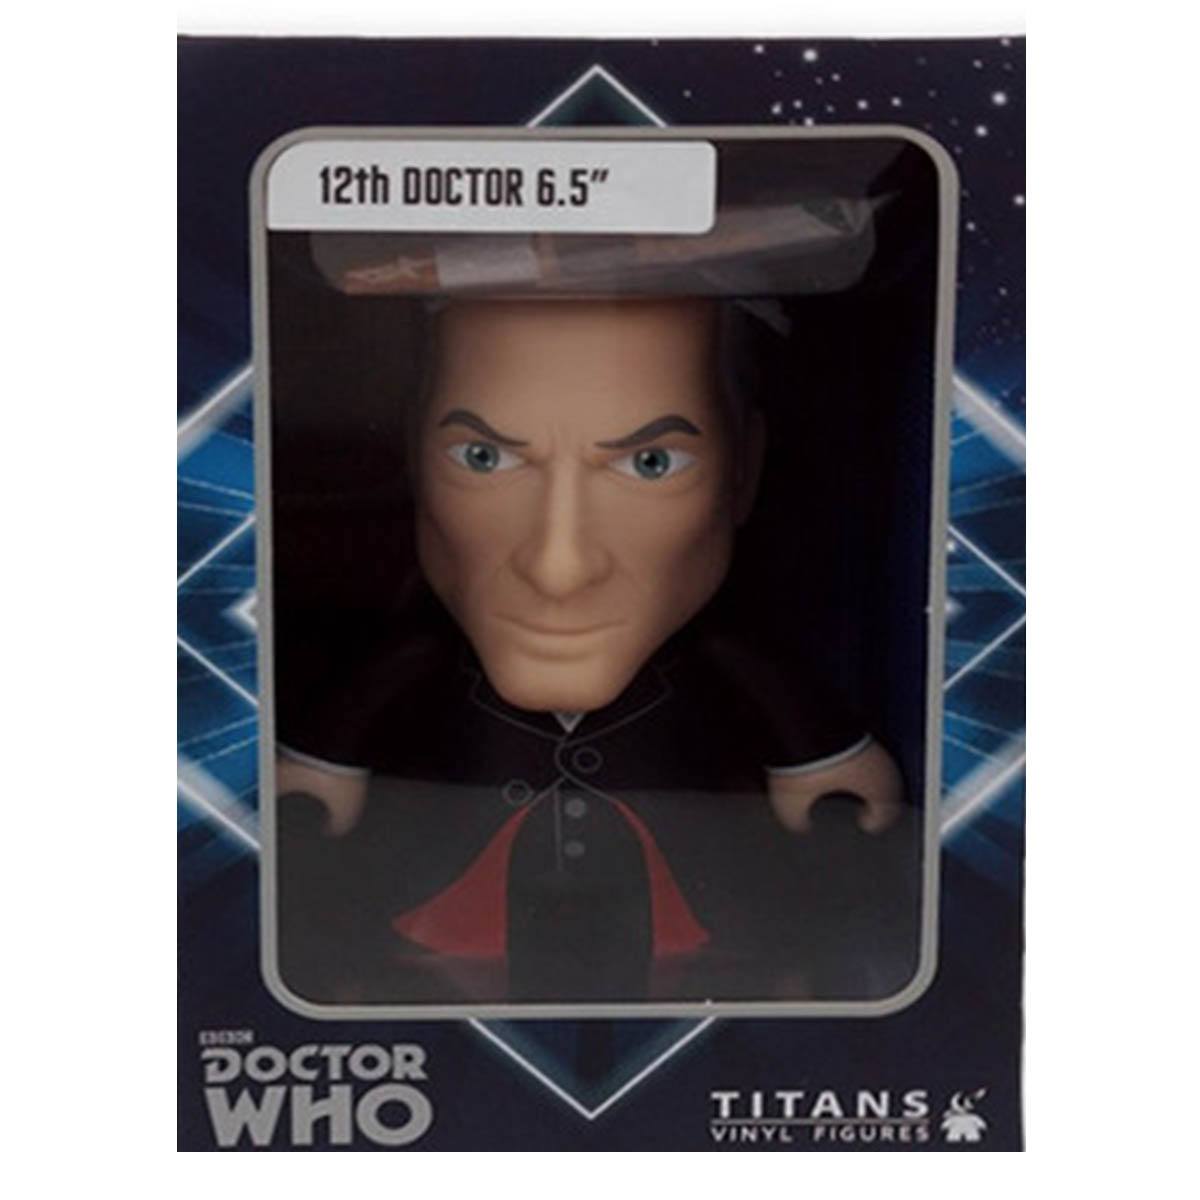 Titan Merchandise Brings Exclusive Doctor Who Goodies to Comic Con